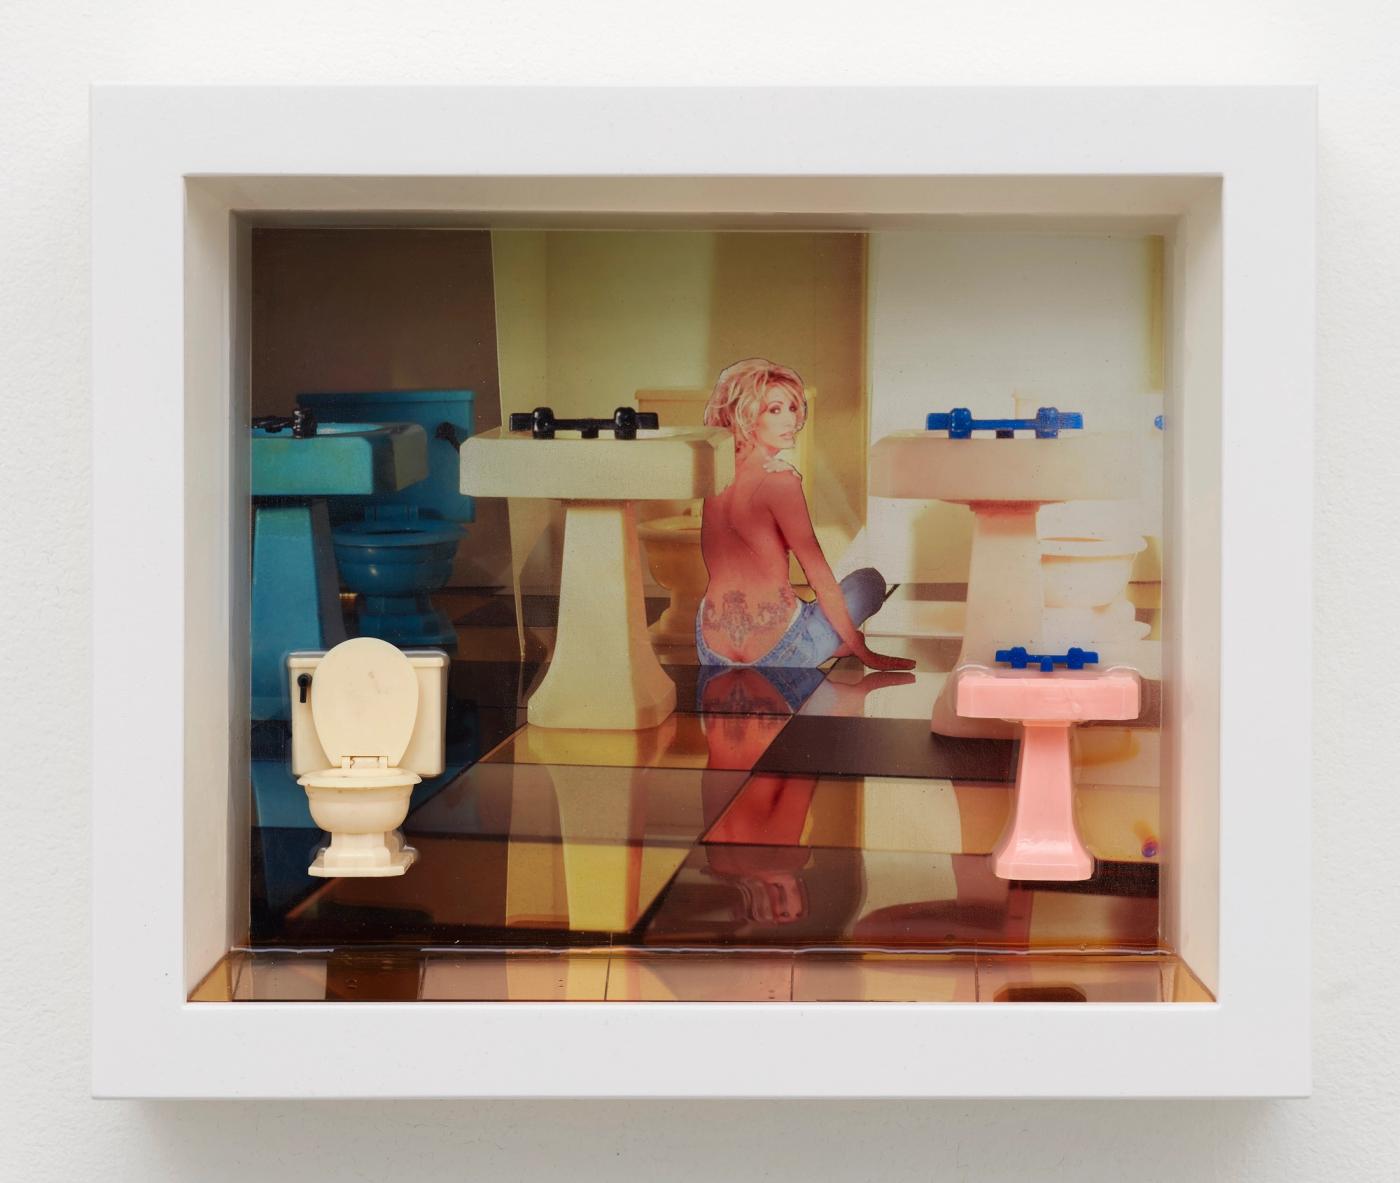 Image of Color Pictures/Deep Photos (White Toilet/Girl in Jeans/Pink Sink), 2022: Ink jet, plastic, resin, wood